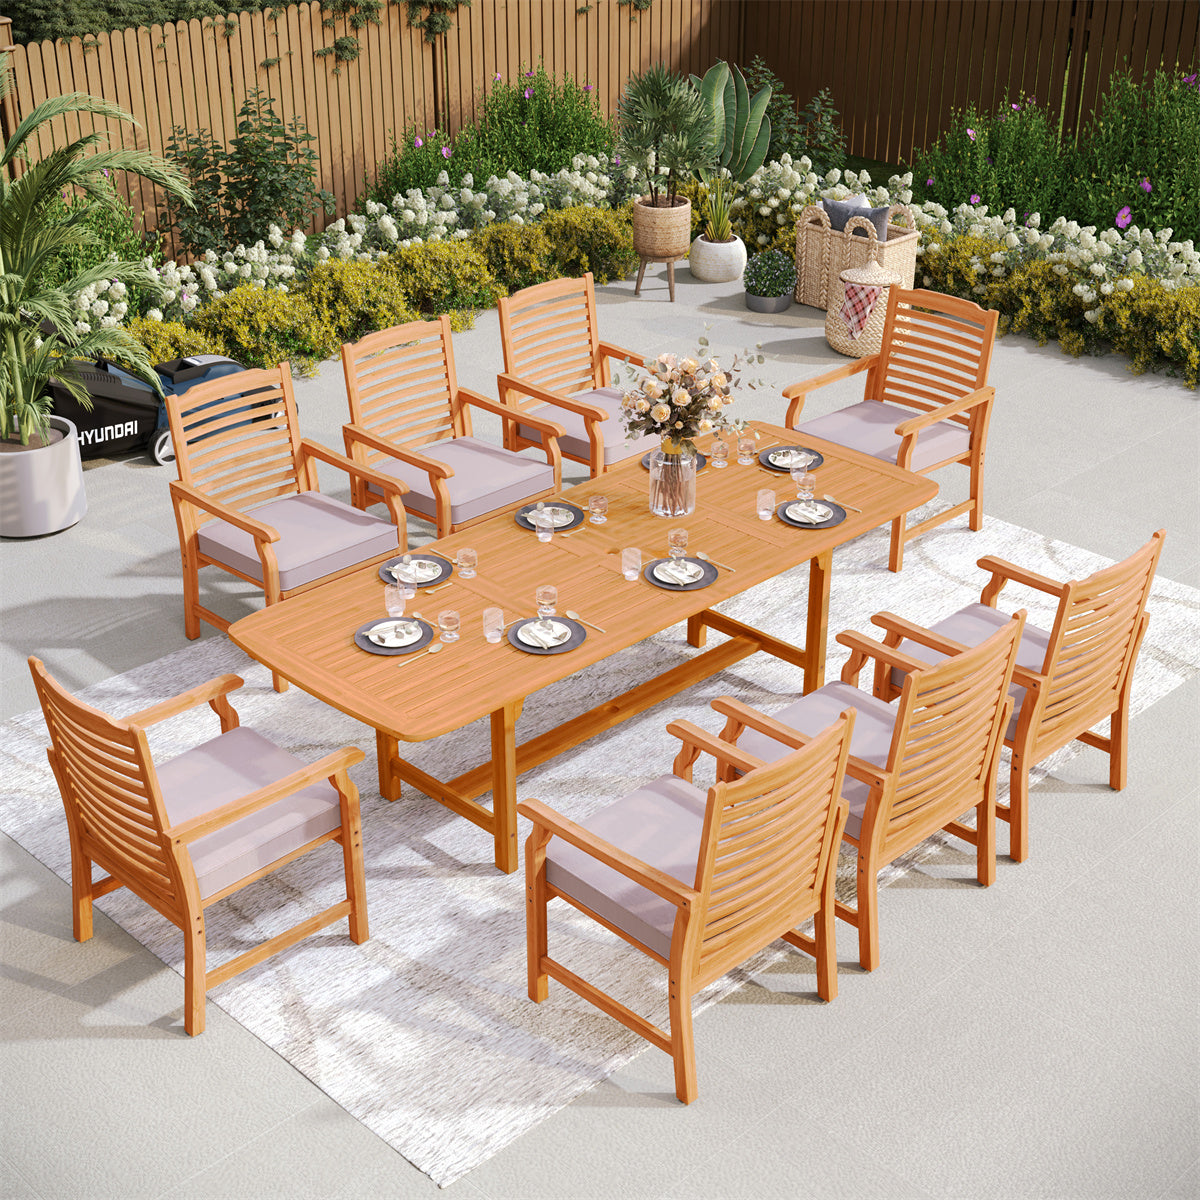 Acacia-wood outdoor dining set of 9 with adjustable table